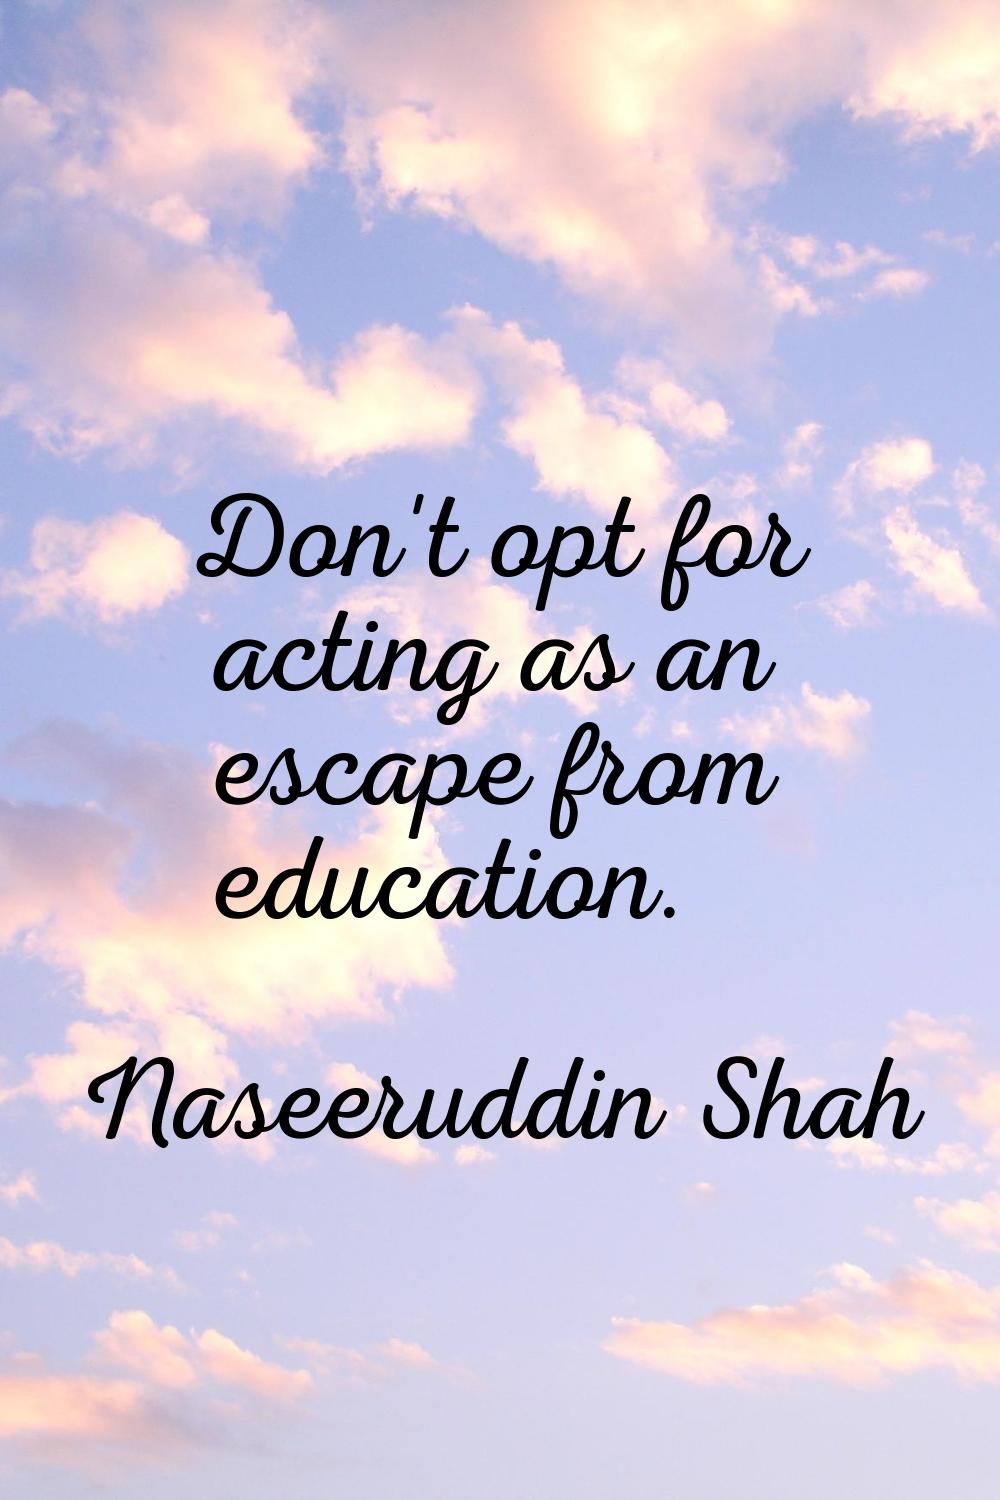 Don't opt for acting as an escape from education.